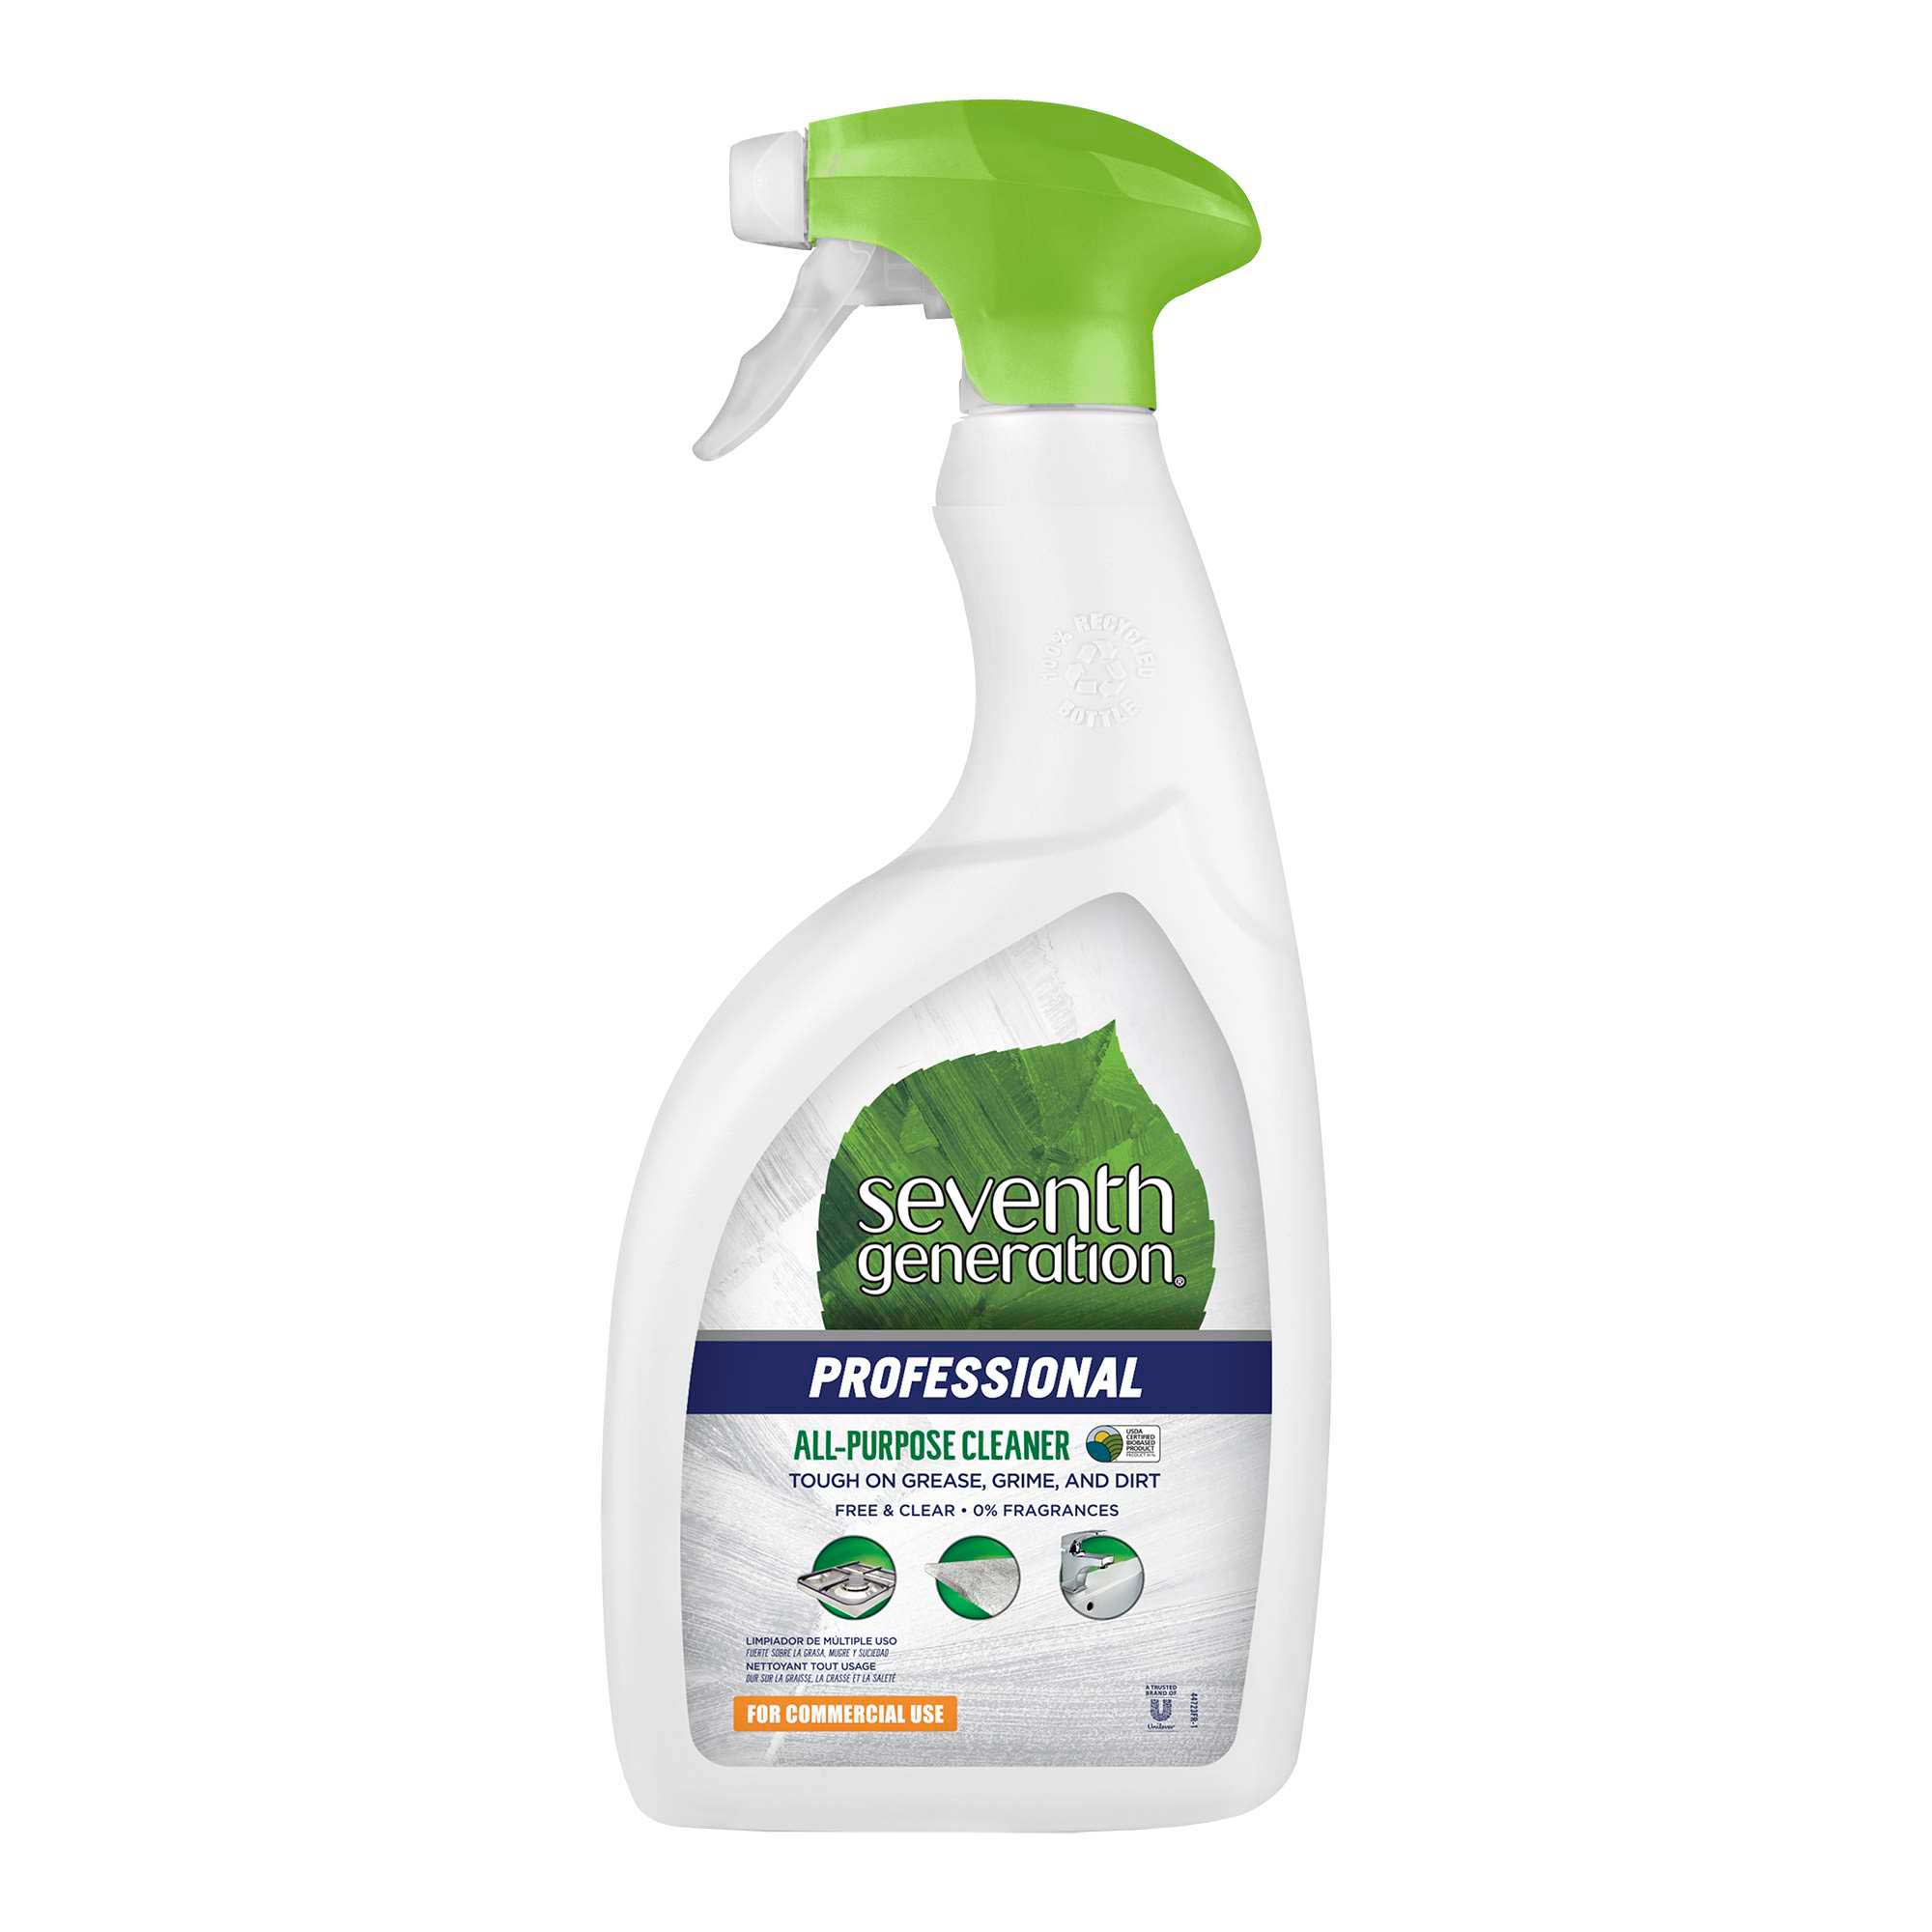 Single Seventh Generation Professional All Purpose Cleaner, 32 Fluid Ounce